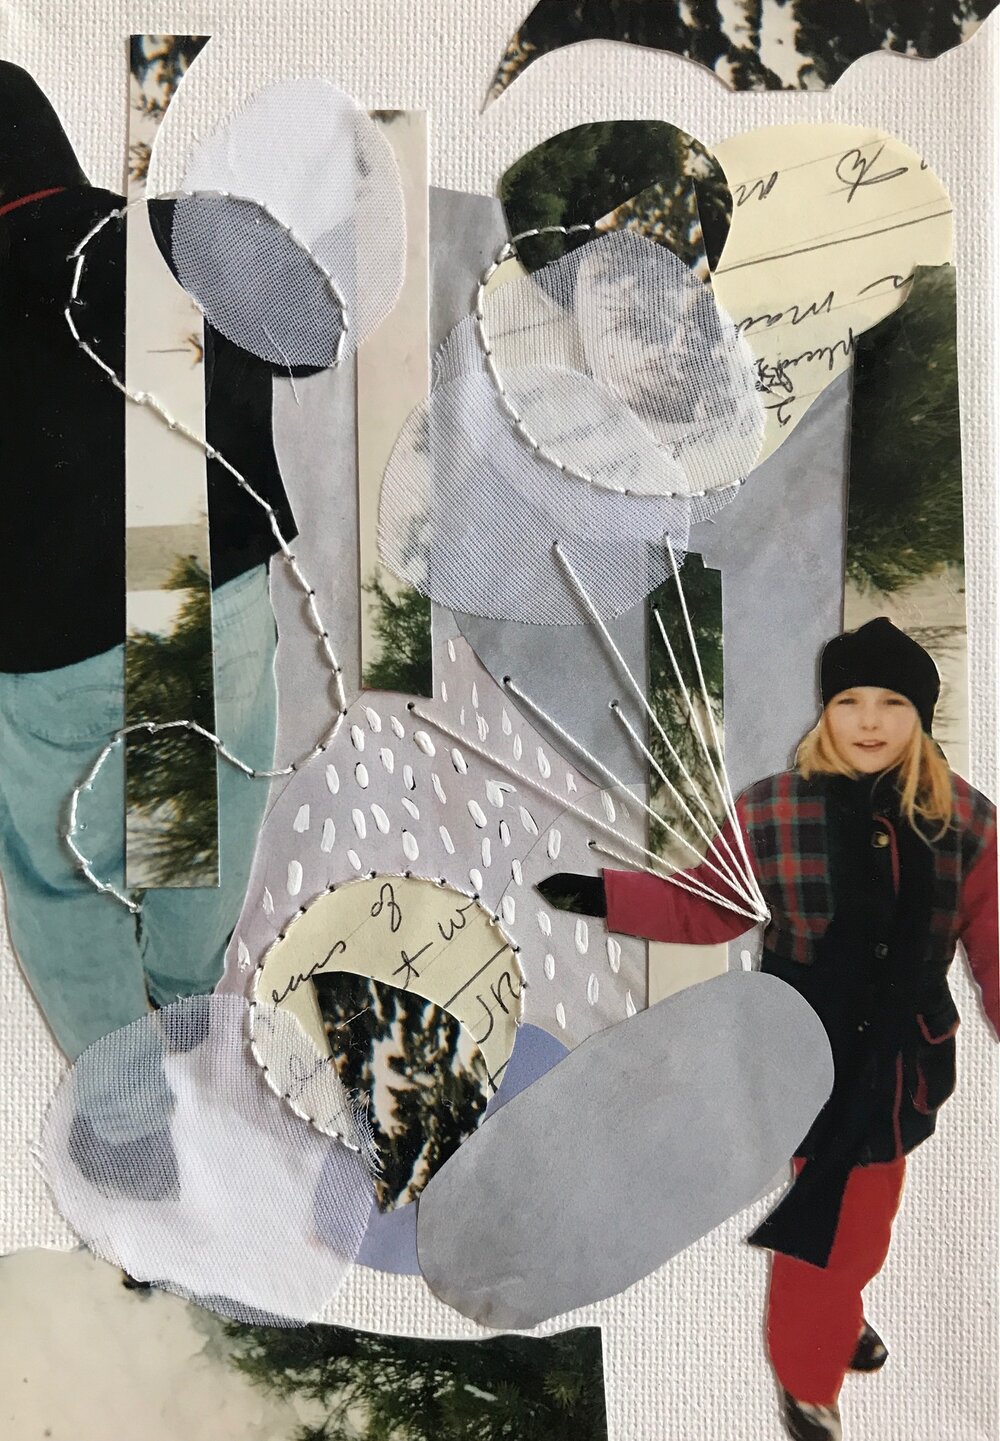 Bittersweet: A Mixed Media Collage — Allyson Demski